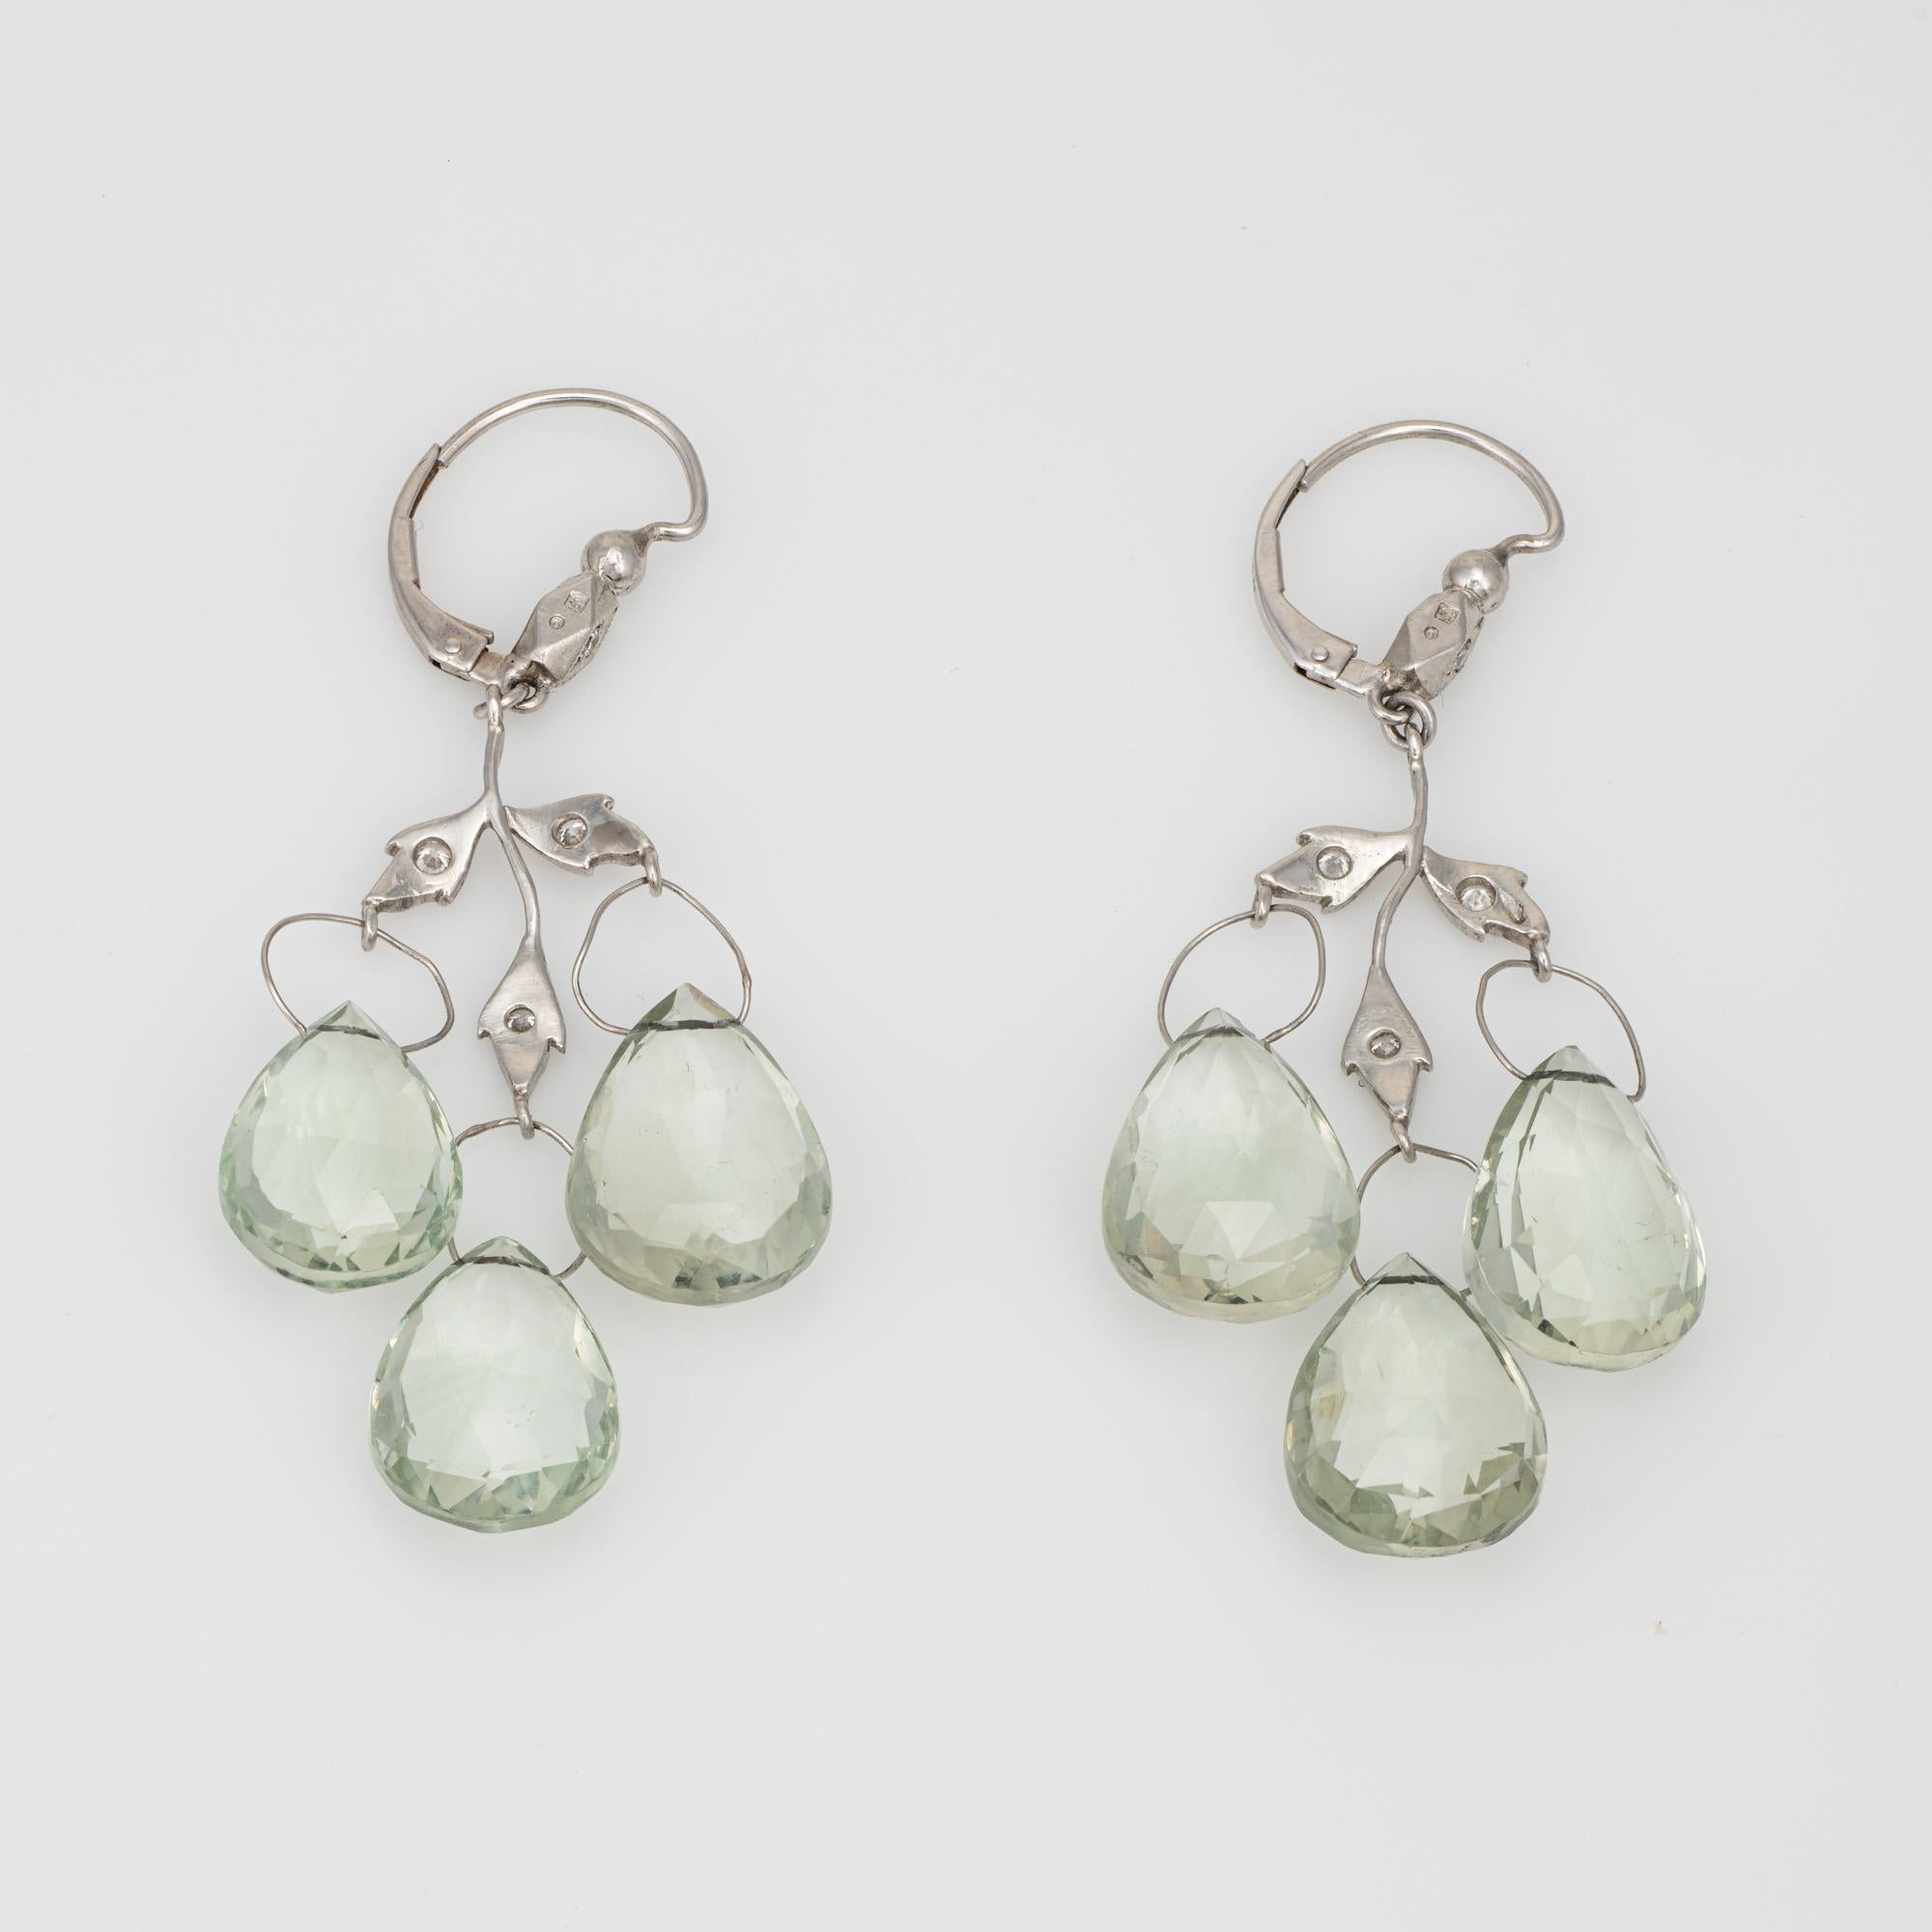 Elegant pair of Cathy Waterman leaf drop earrings crafted in 900 platinum. 

Checkerboard faceted prasiolite green amethyst measures 15mm x 11mm and total an estimated 42 carats. The eight estimated 0.01 carat round brilliant cut diamonds total an